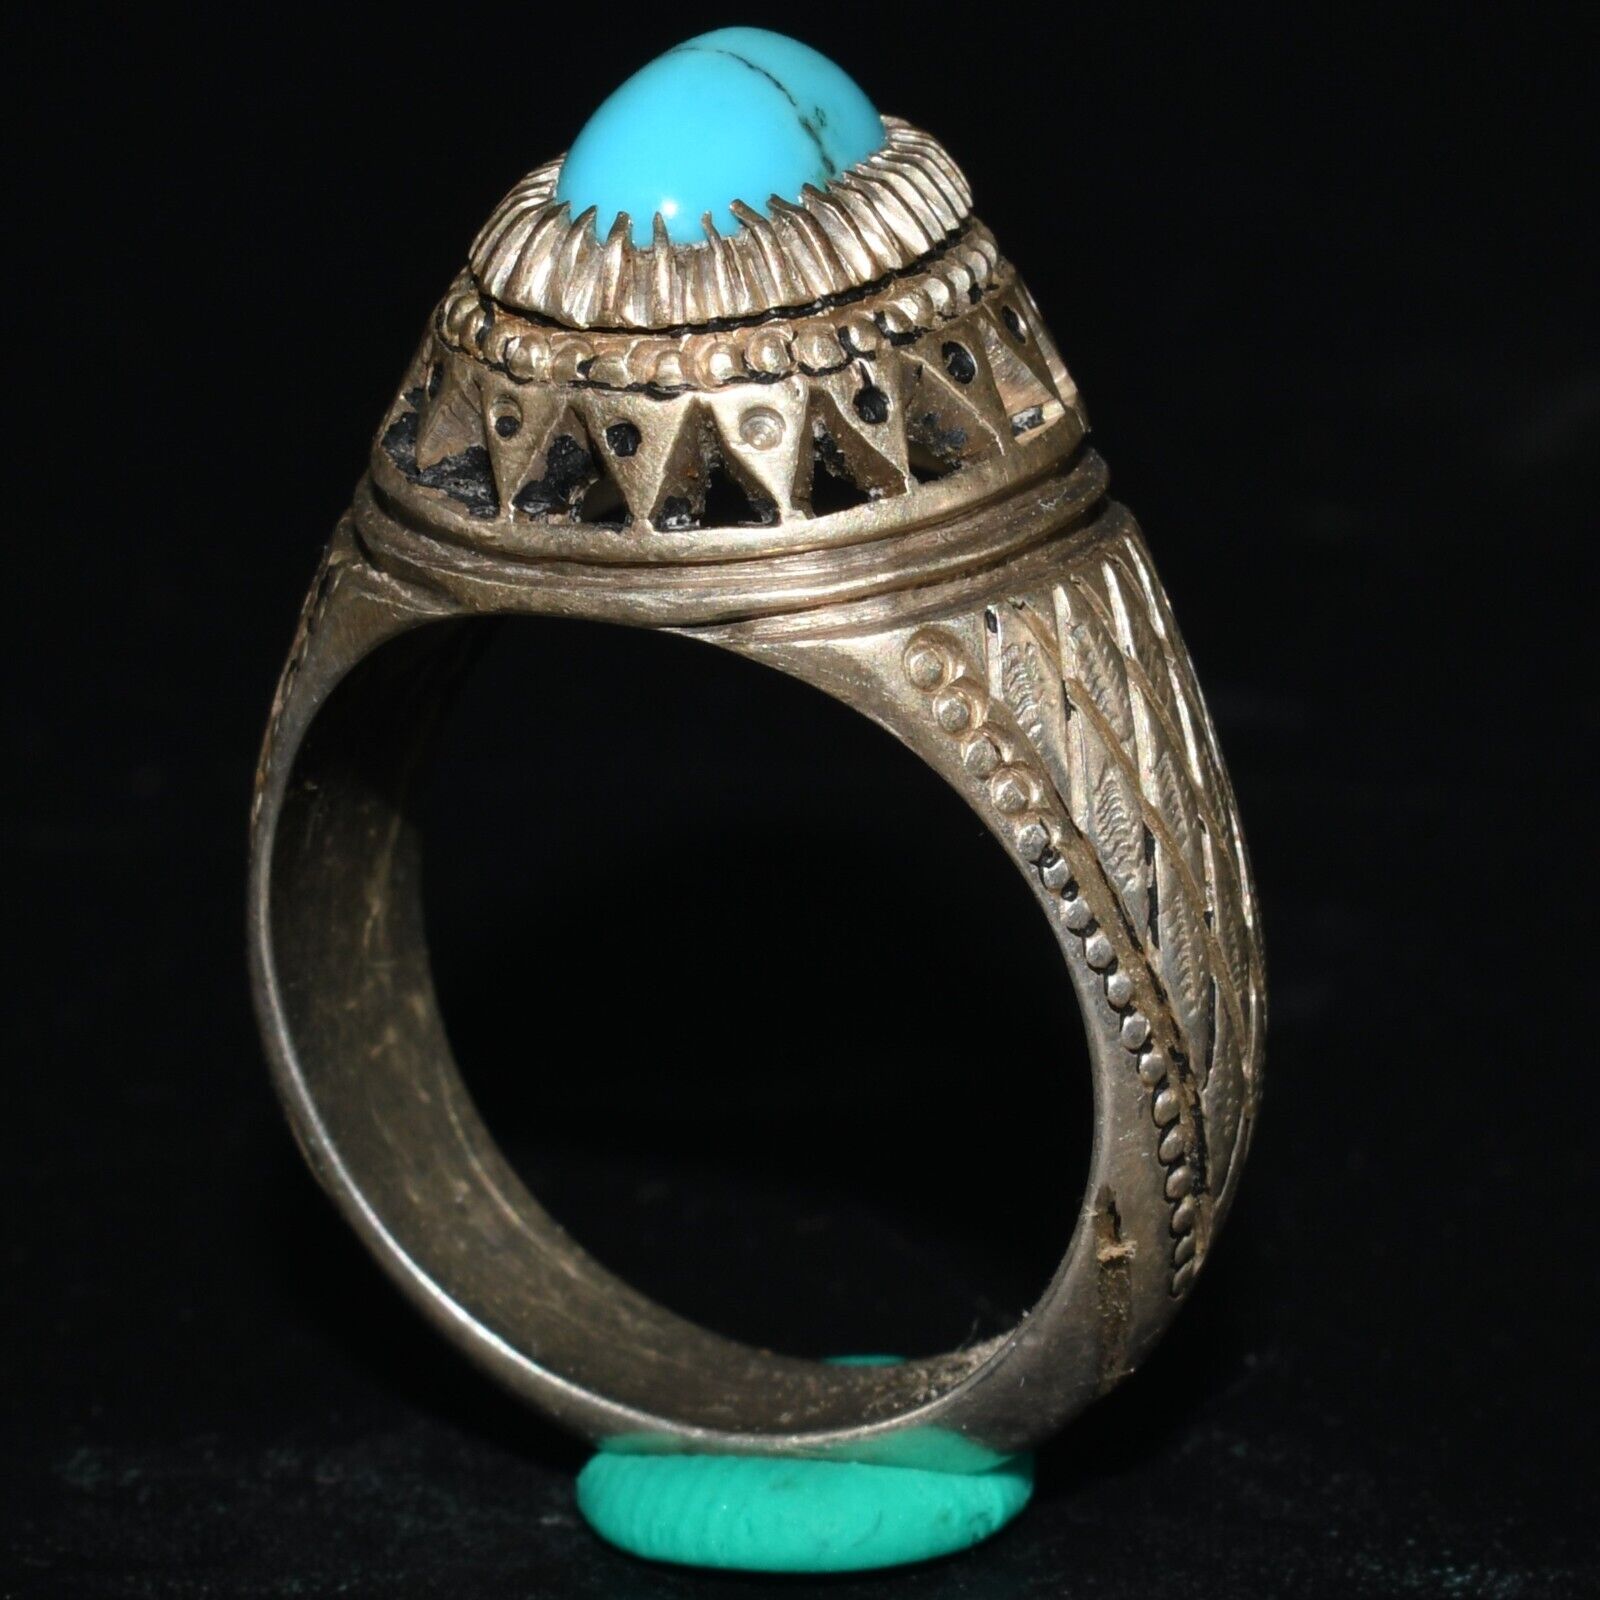 Vintage Old Near Eastern Solid Silver Ring with Natural Turquoise Stone Bezel